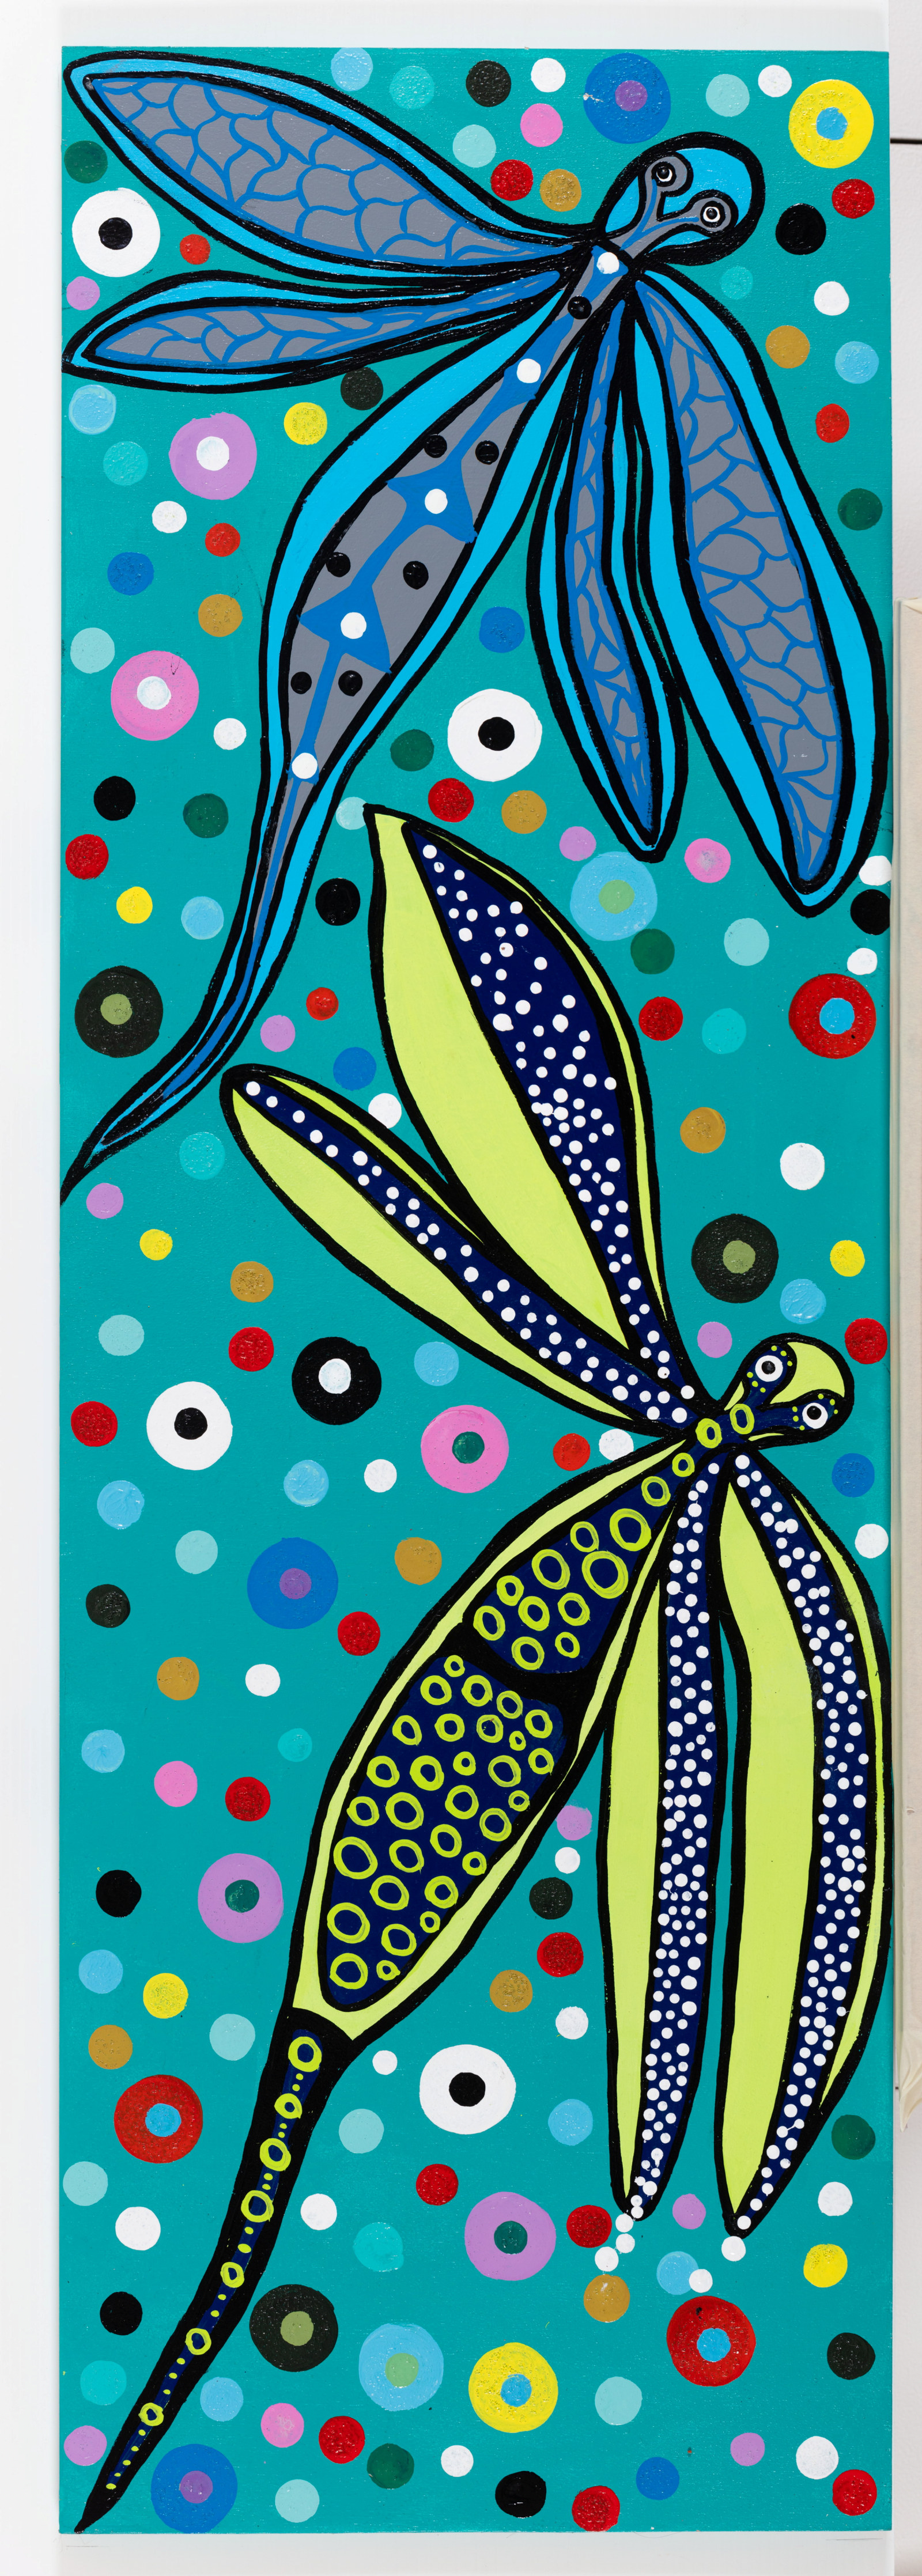 Dragonfly, Lorraine Brown and Narelle Thomas, 2022, acrylic on plywood board, 122.5cm x 41cm 
Coomie Lagoon hovering creatures. Always a part of the Lagoon life.